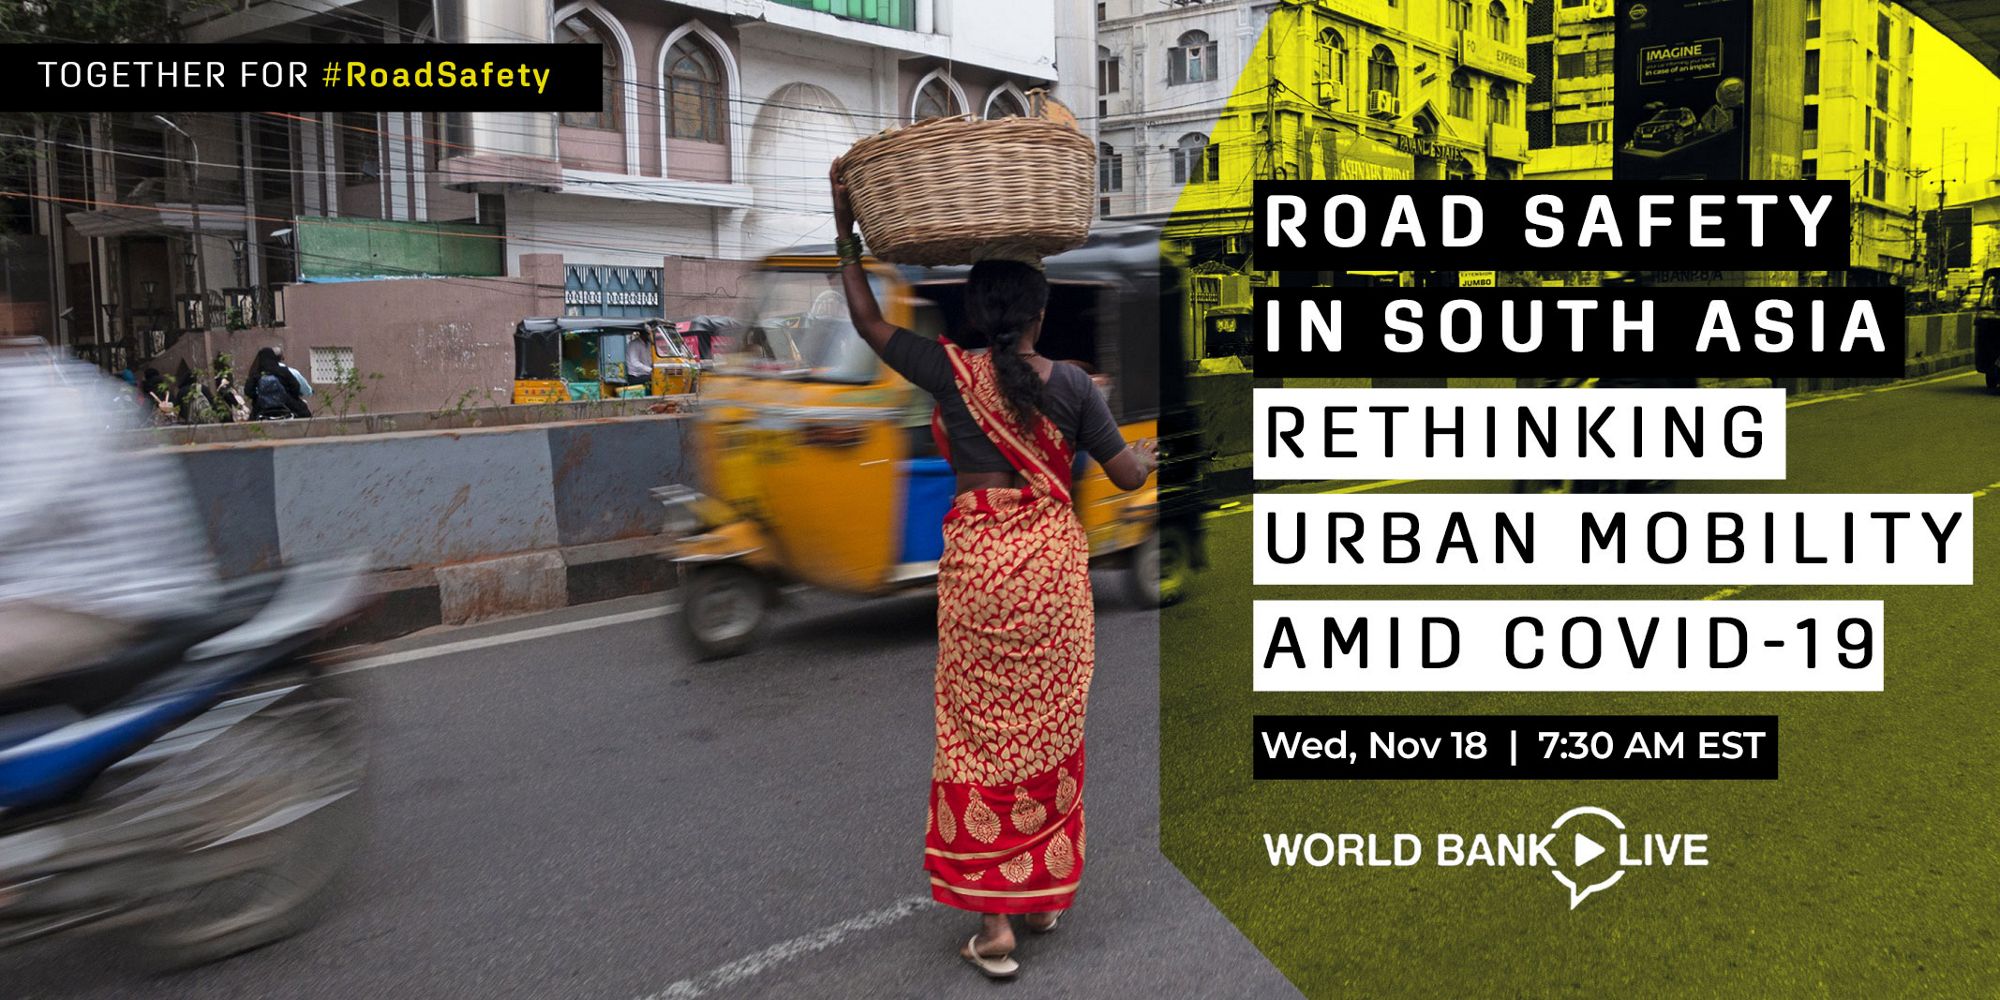 Road Safety in South Asia – Rethinking Urban Mobility amid COVID-19